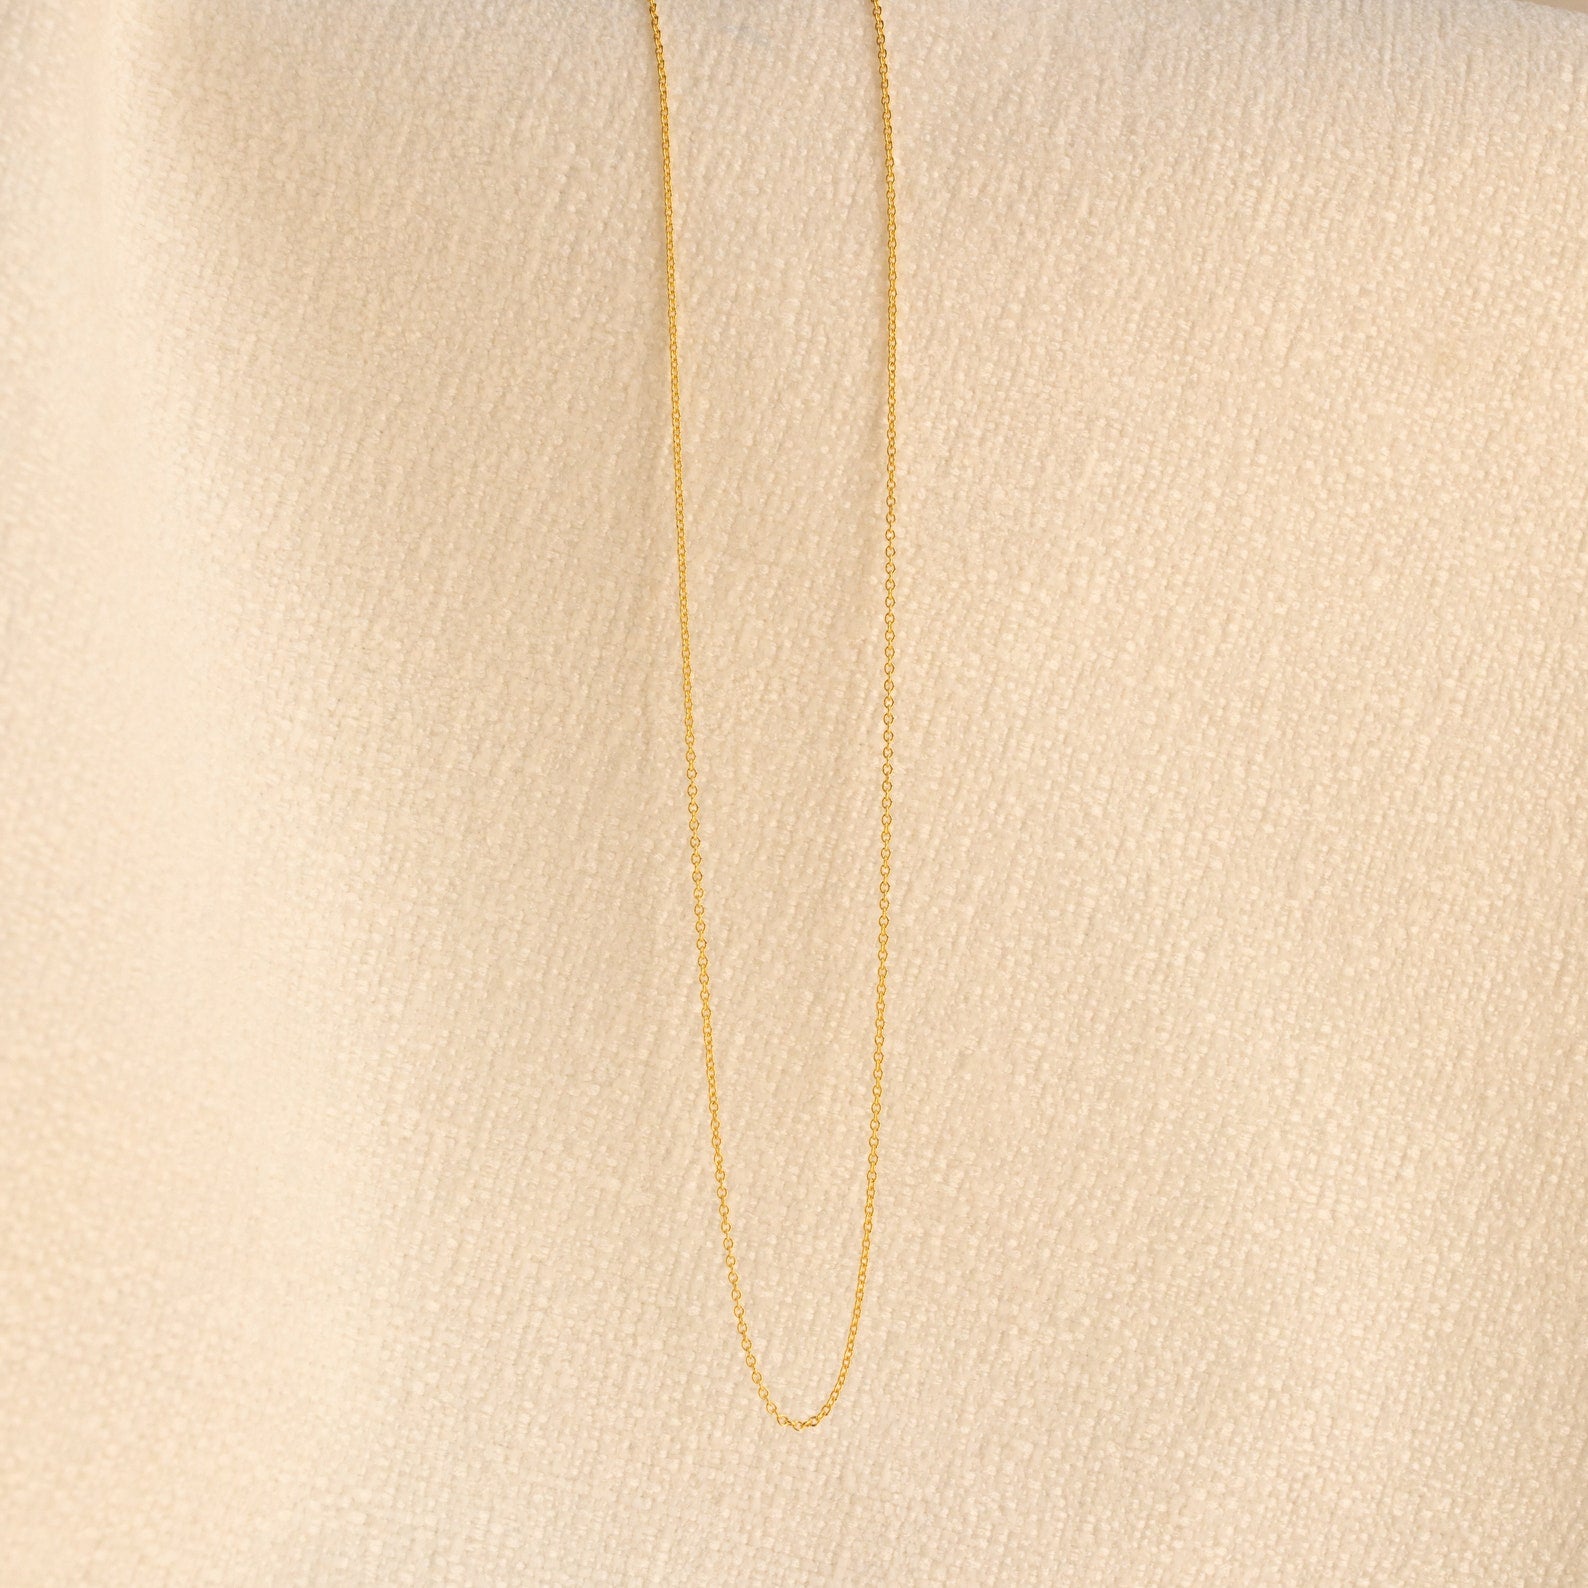 Silver Chain Necklace, Thin Chain Necklace, Stacking Necklace - $20 New  With Tags - From Boutiquejbylee